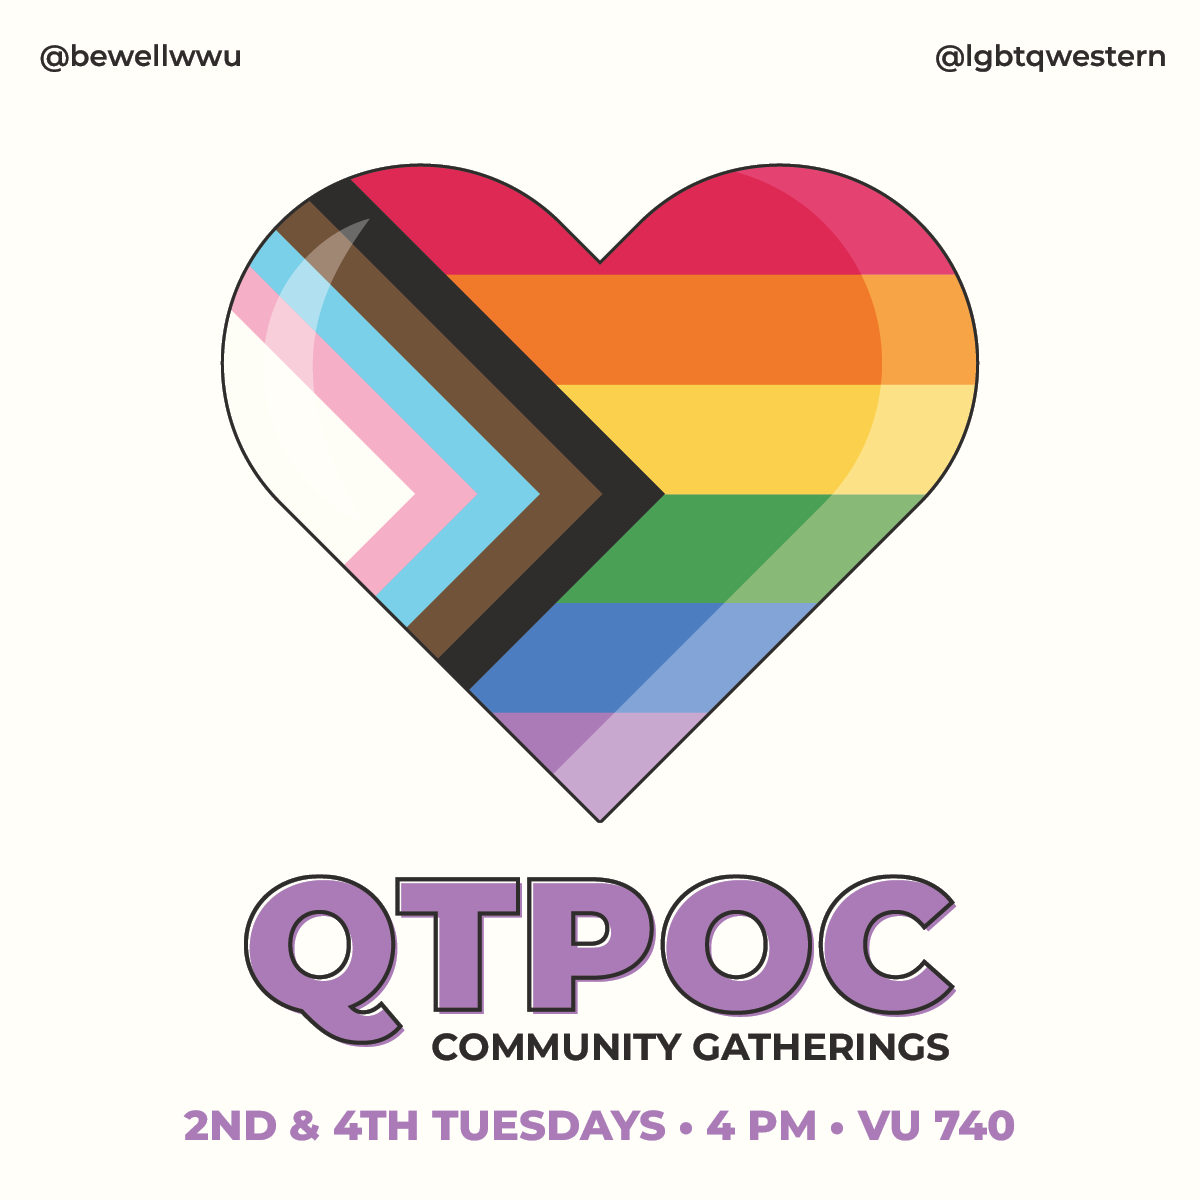 decorative event flyer with a progressive pride flag design in a heart and event details in text below. Full image description below.